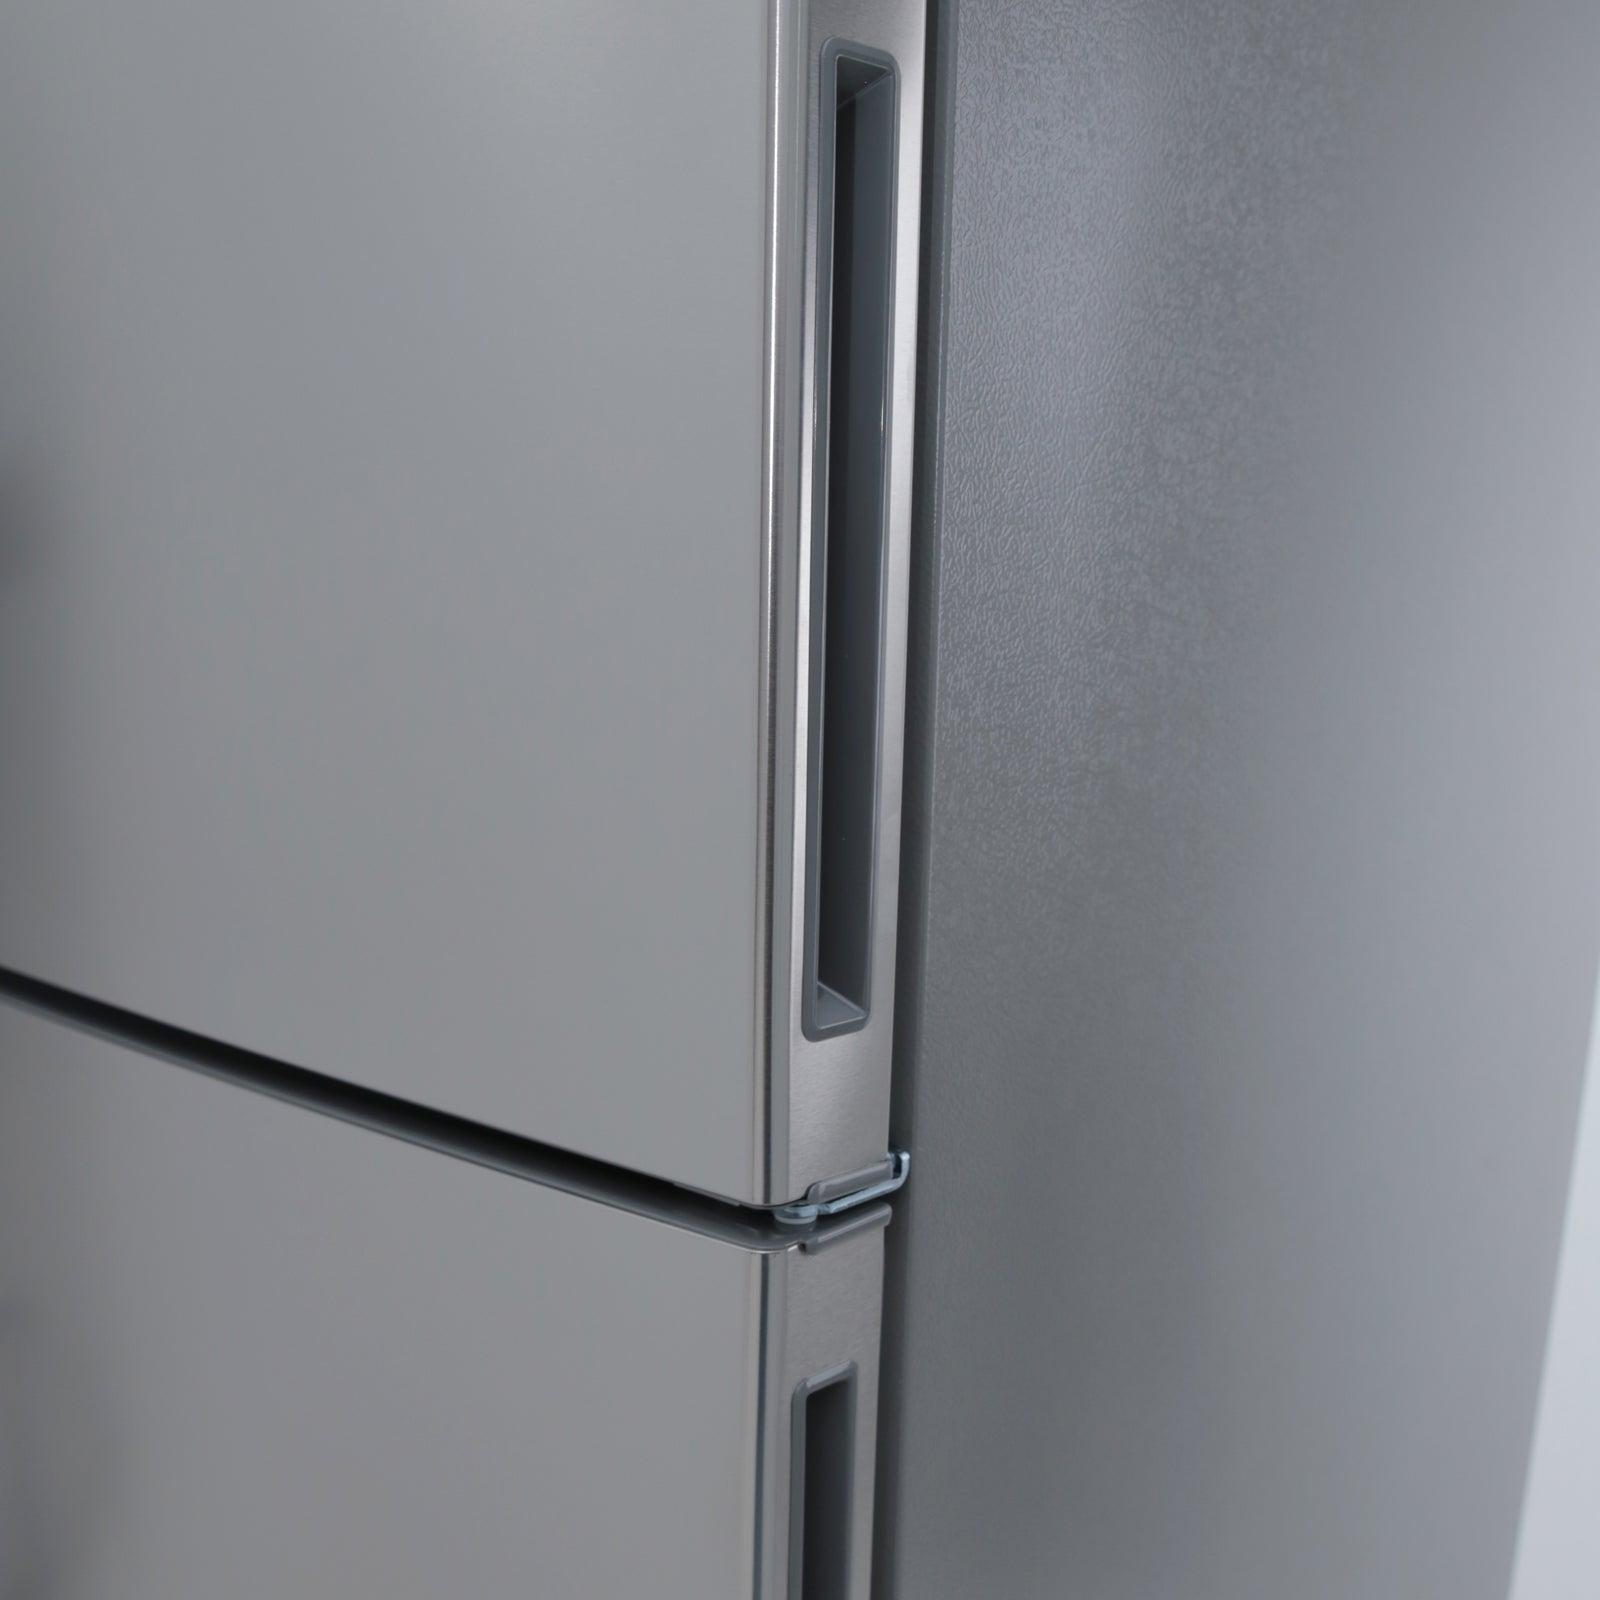 Avanti Frost-Free Apartment Size Refrigerator, 18.0 cu. ft. - Stainless Steel / 18 cu. ft.